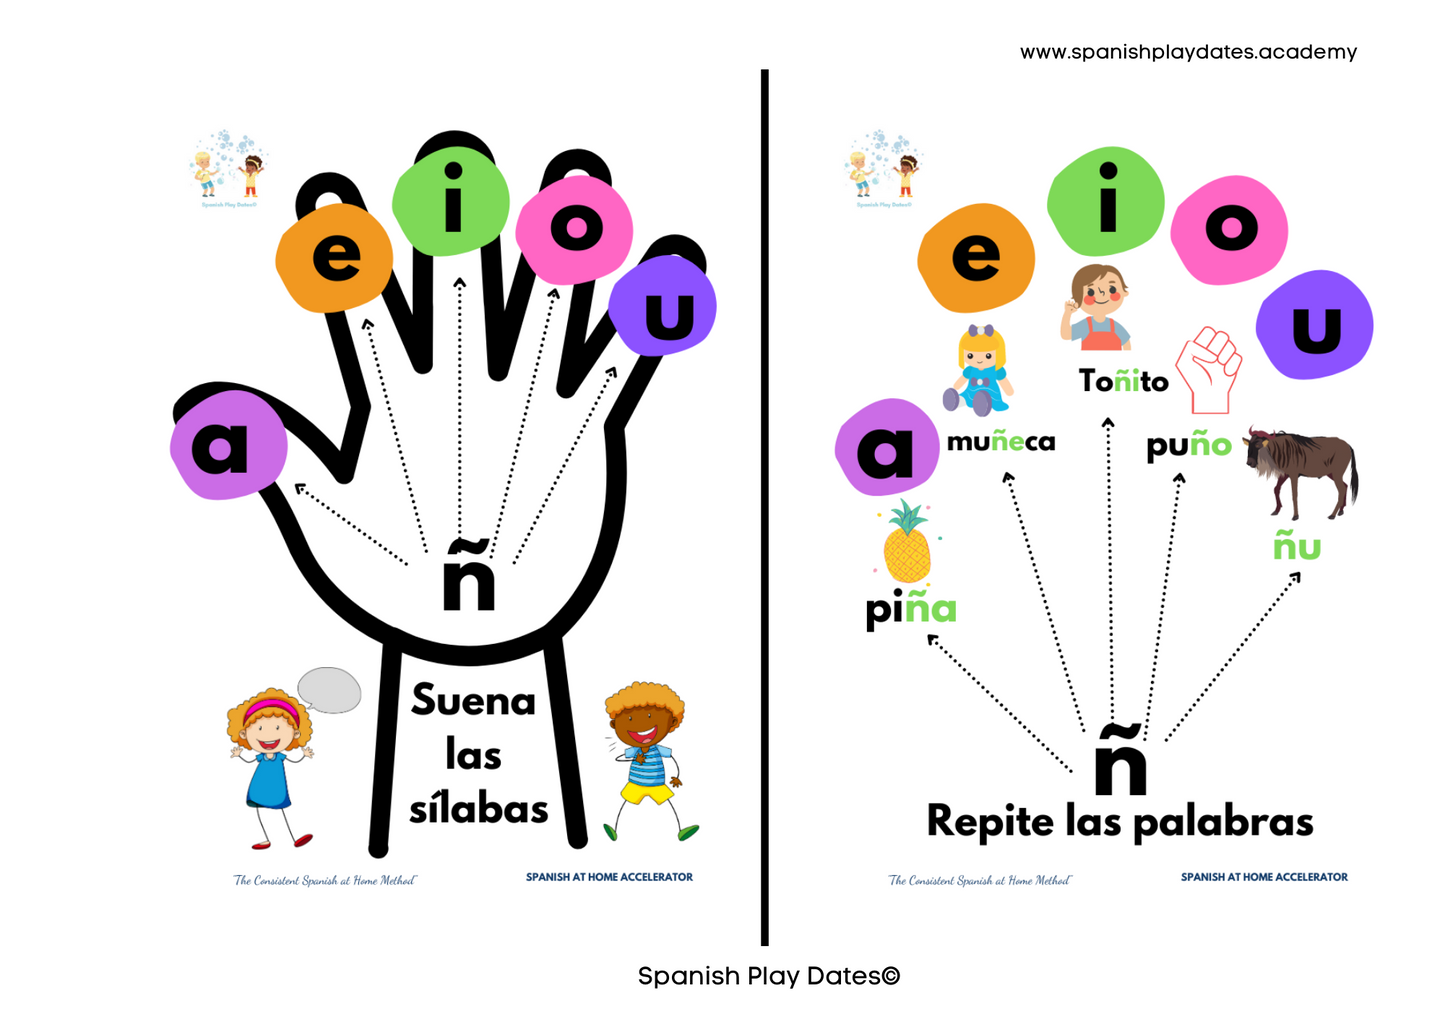 Manitas Silábicas - Learning to read in Spanish